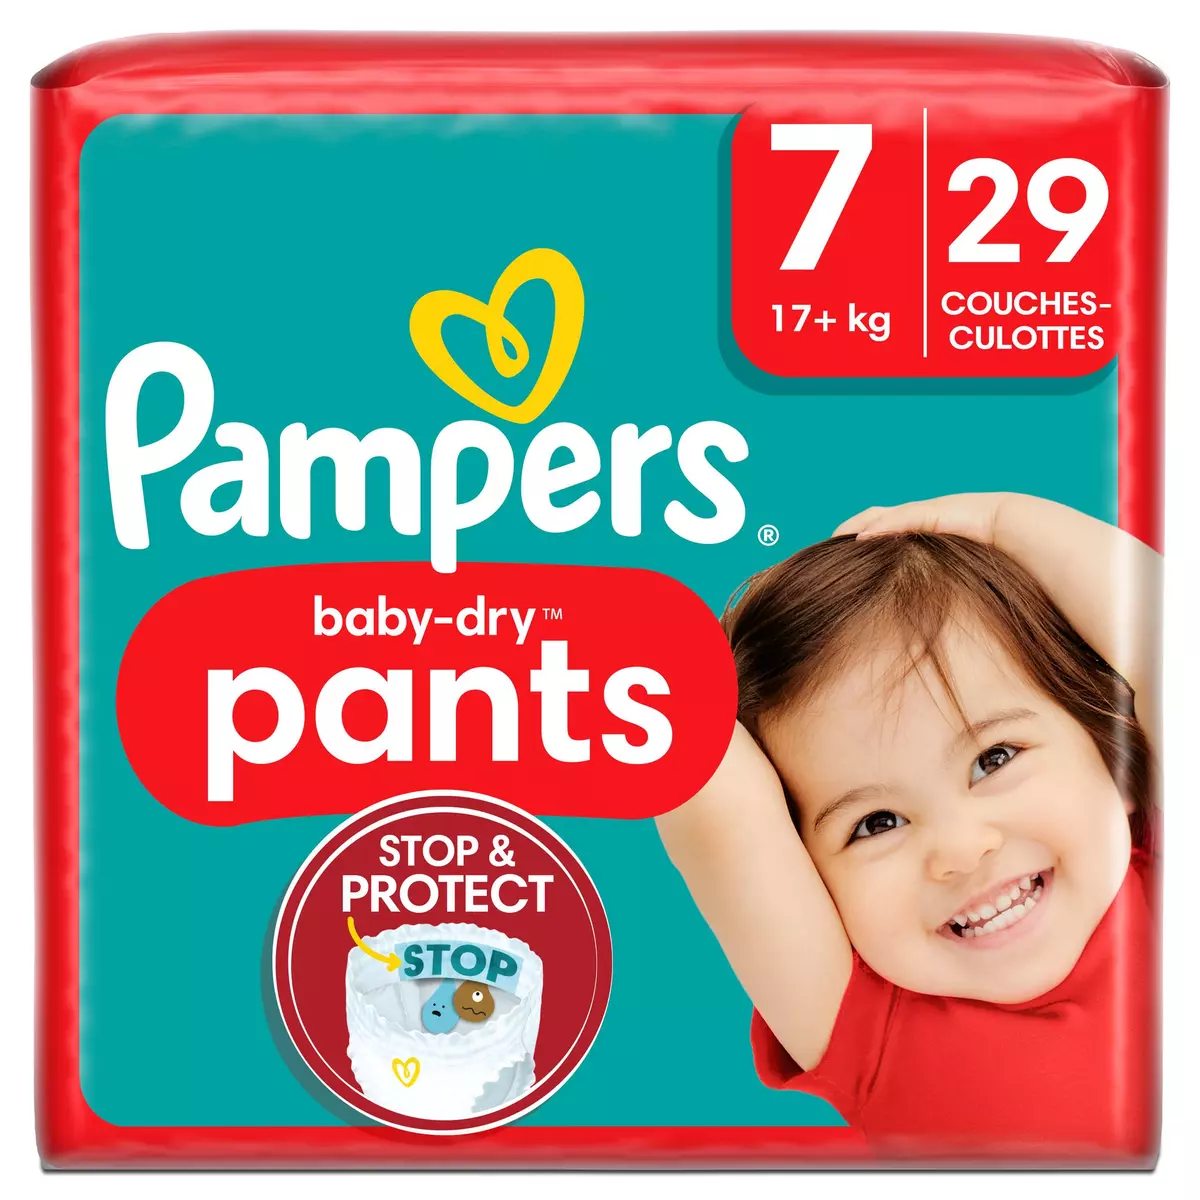 PAMPERS Baby-Dry pants couches-culottes taille 7 (+17kg) 29 couches pas  cher 